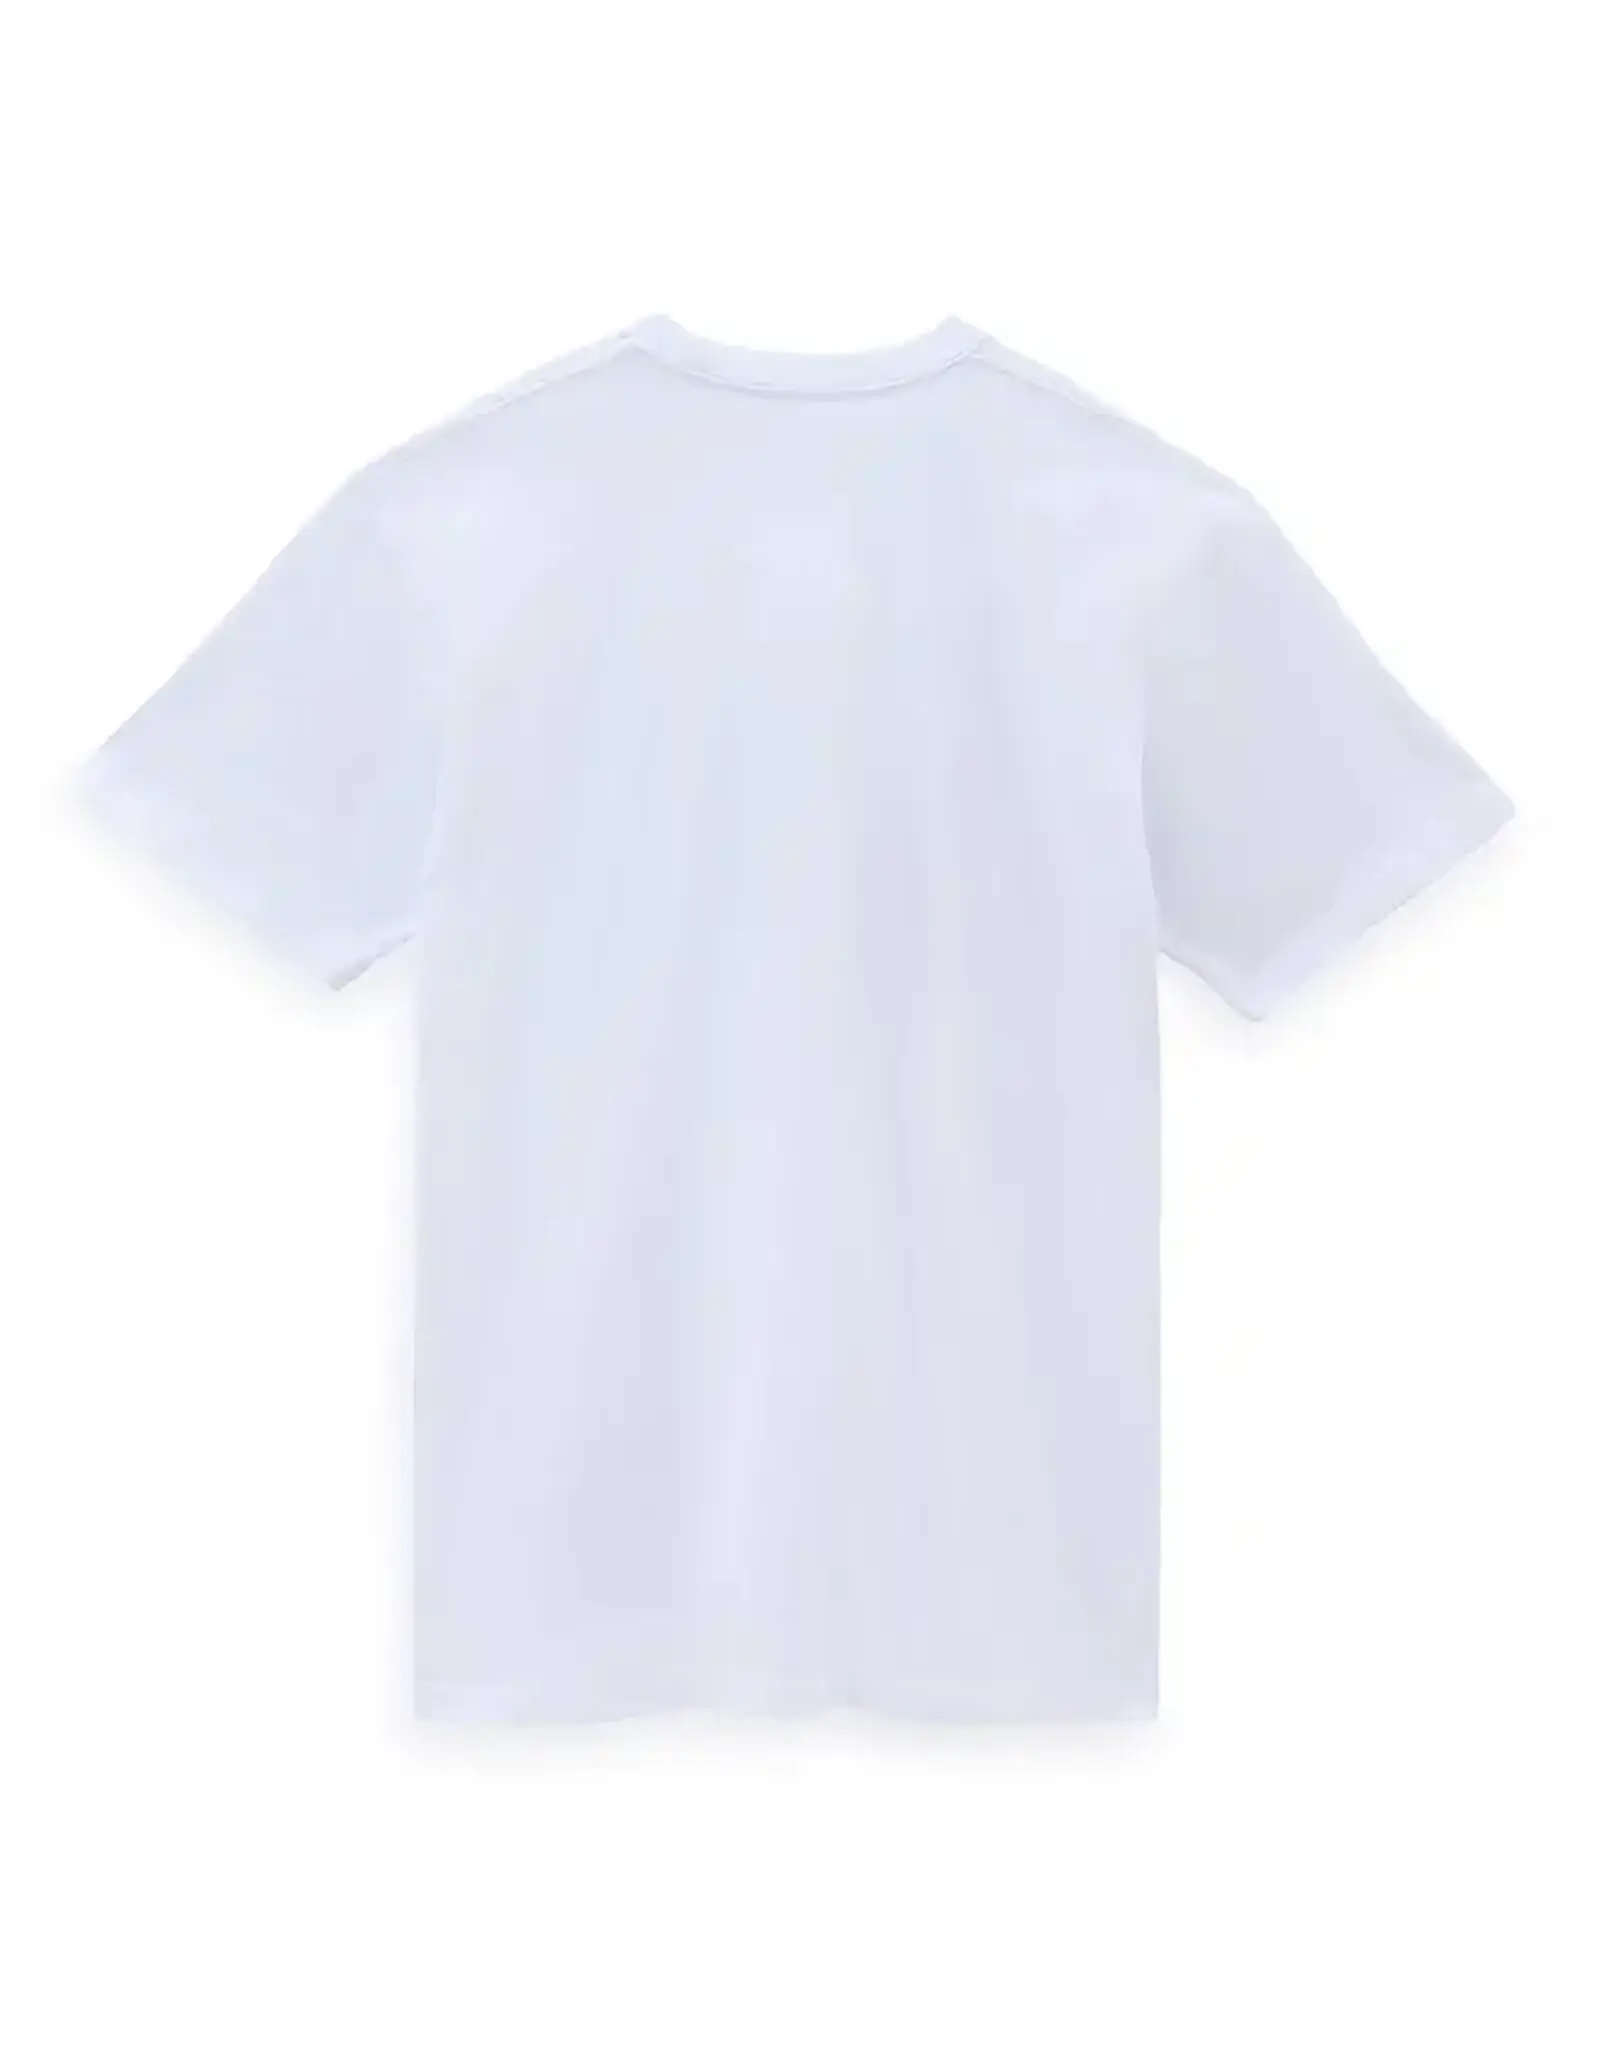 VANS OFF THE WALL™ Classic Front T-shirt White/Black - VN00004XYB2